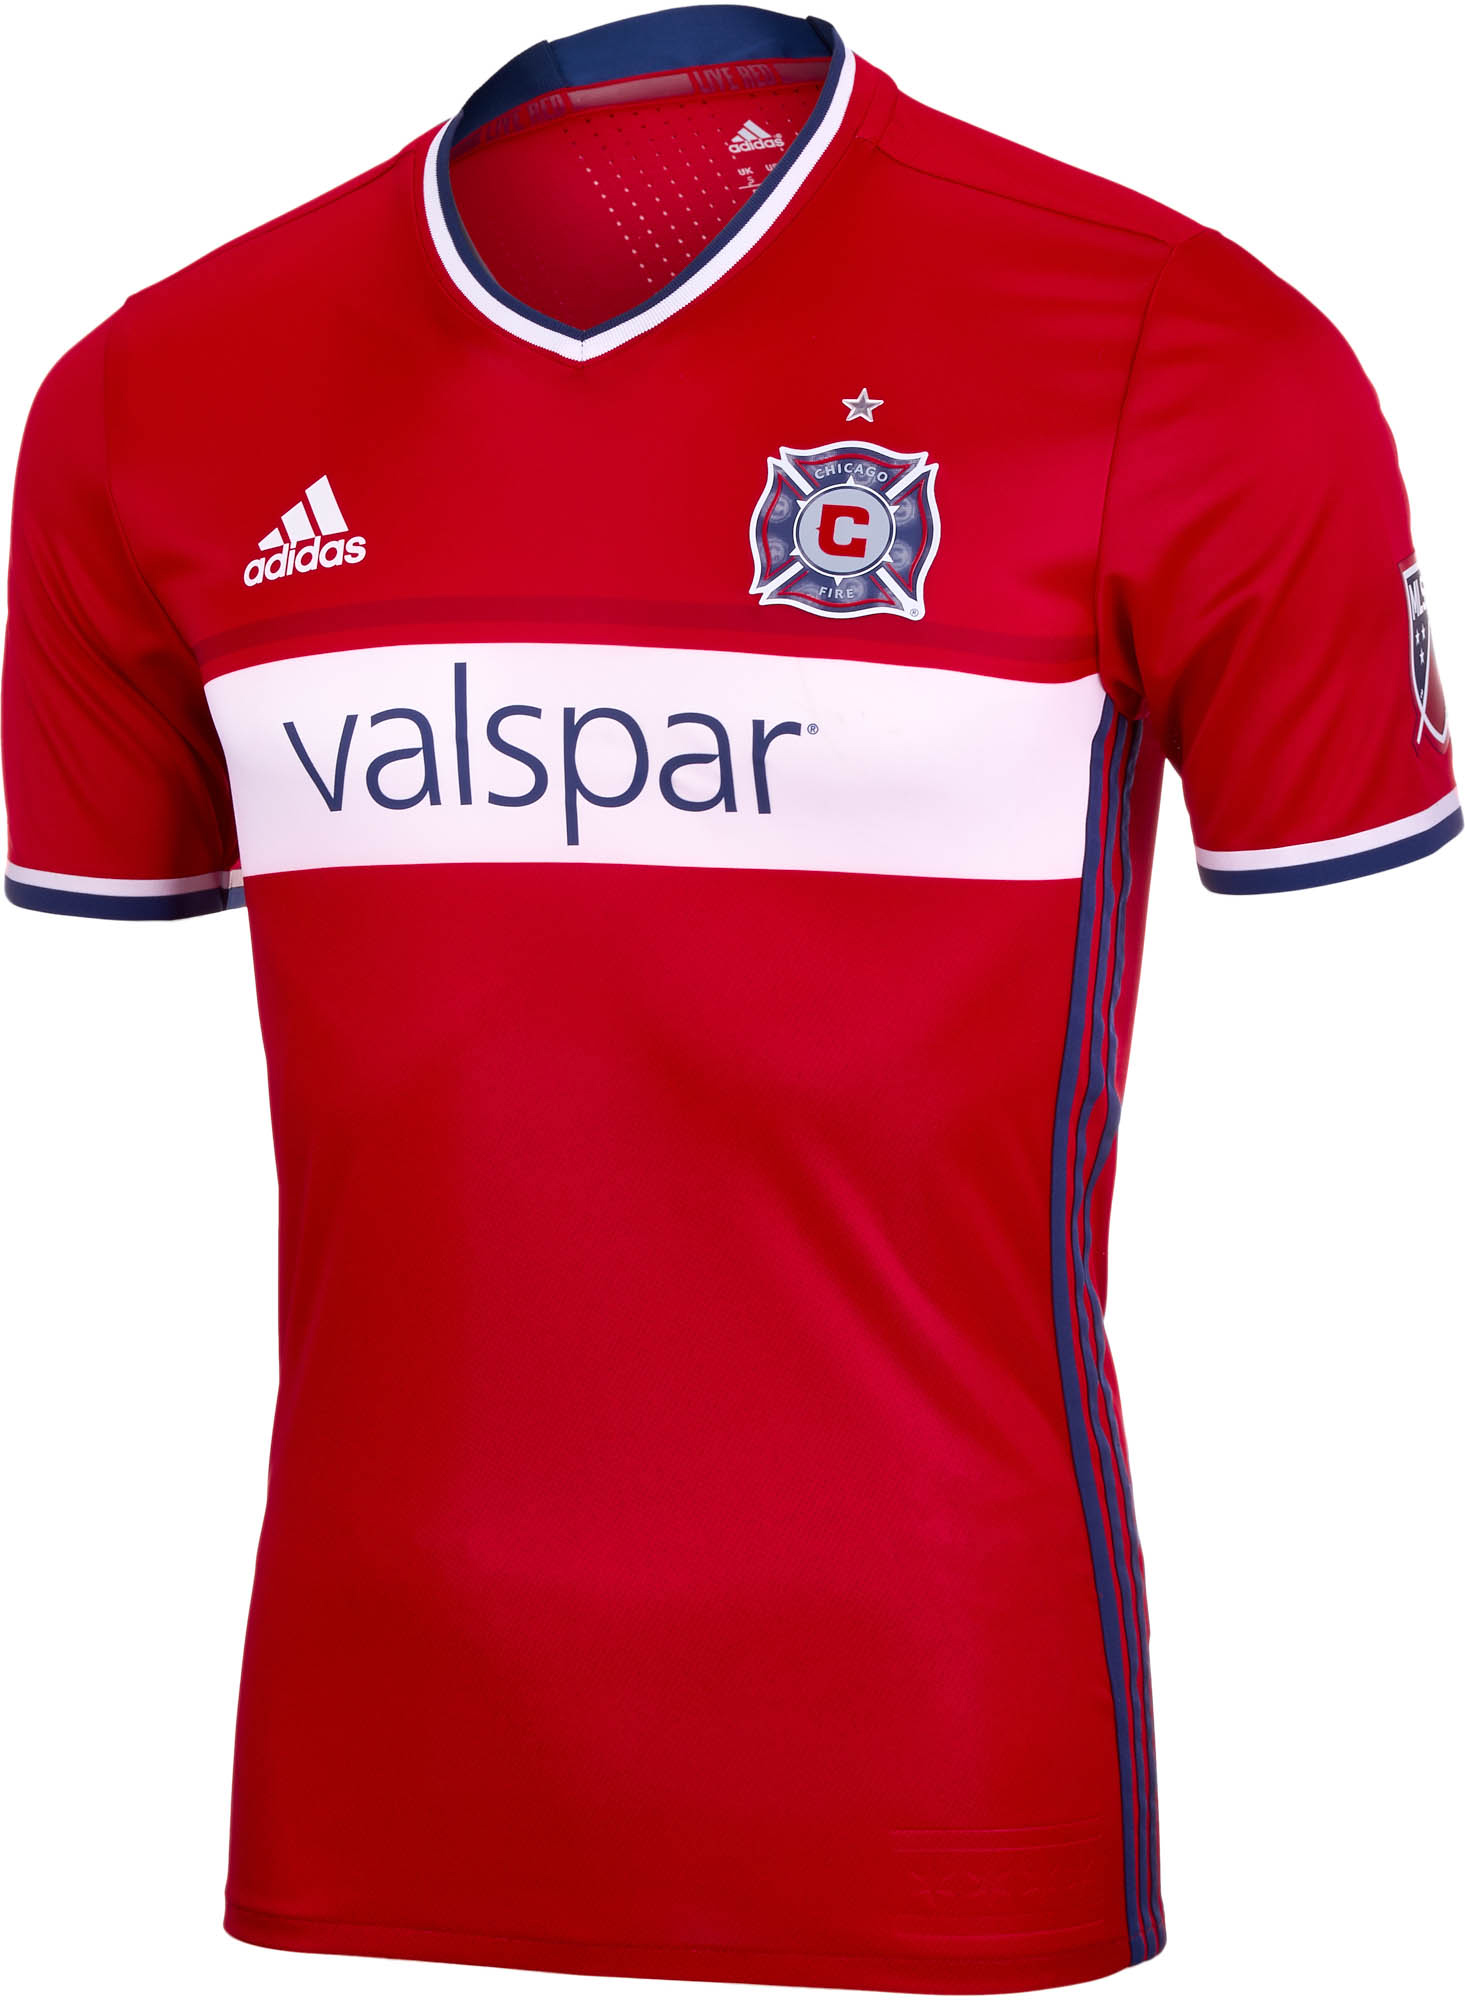 adidas Chicago Fire Home Jersey - 2016 Chicago Soccer Jerseys